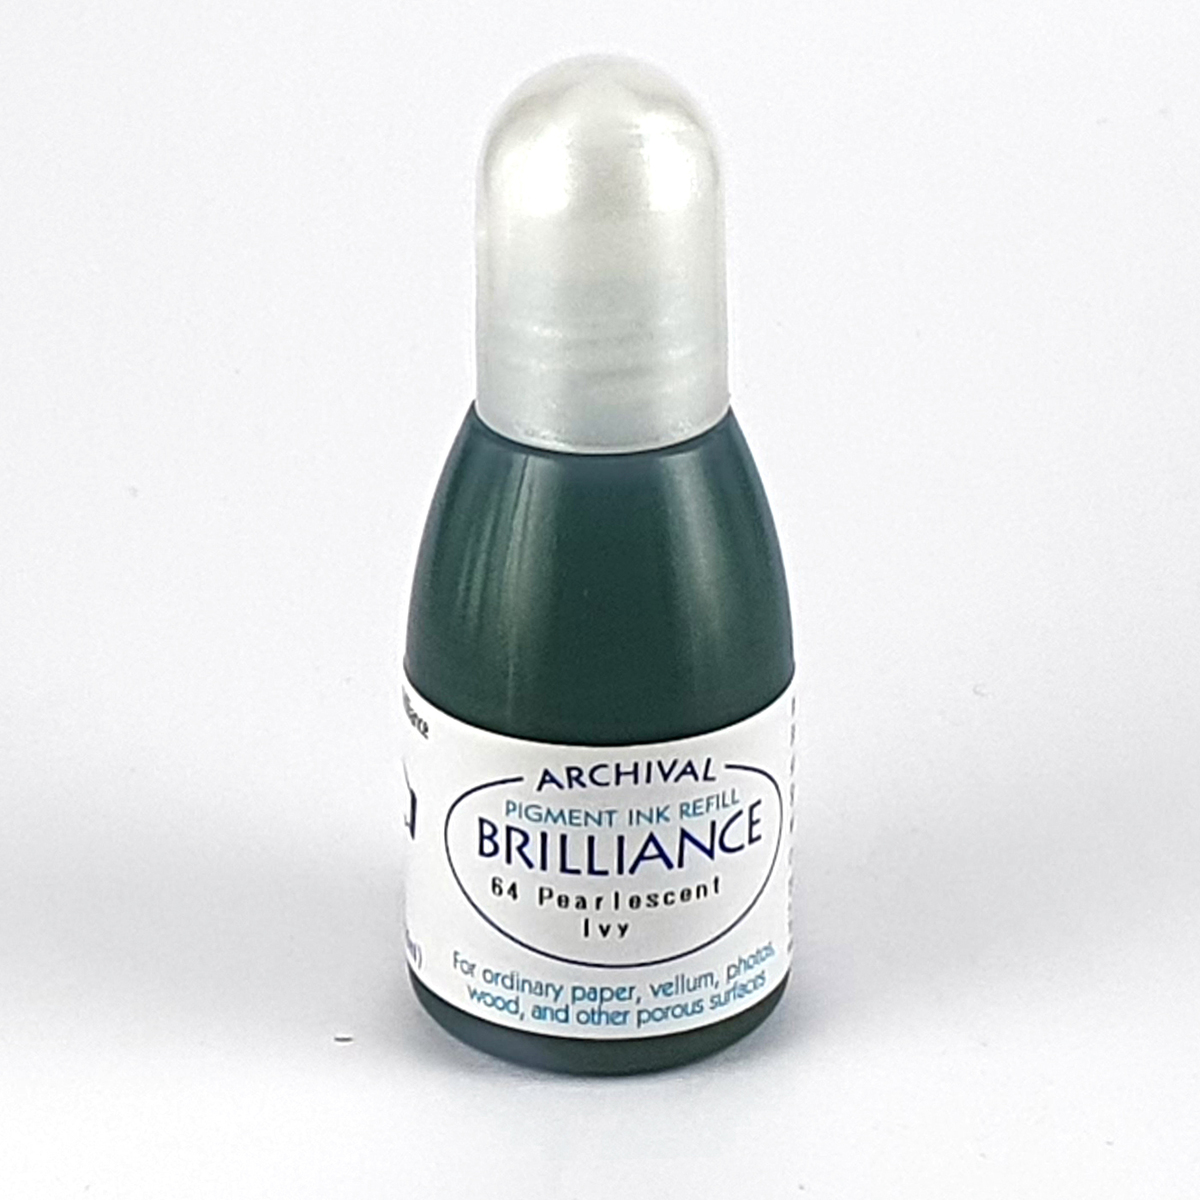 Brilliance Re-Inker Pearlescent Ivy